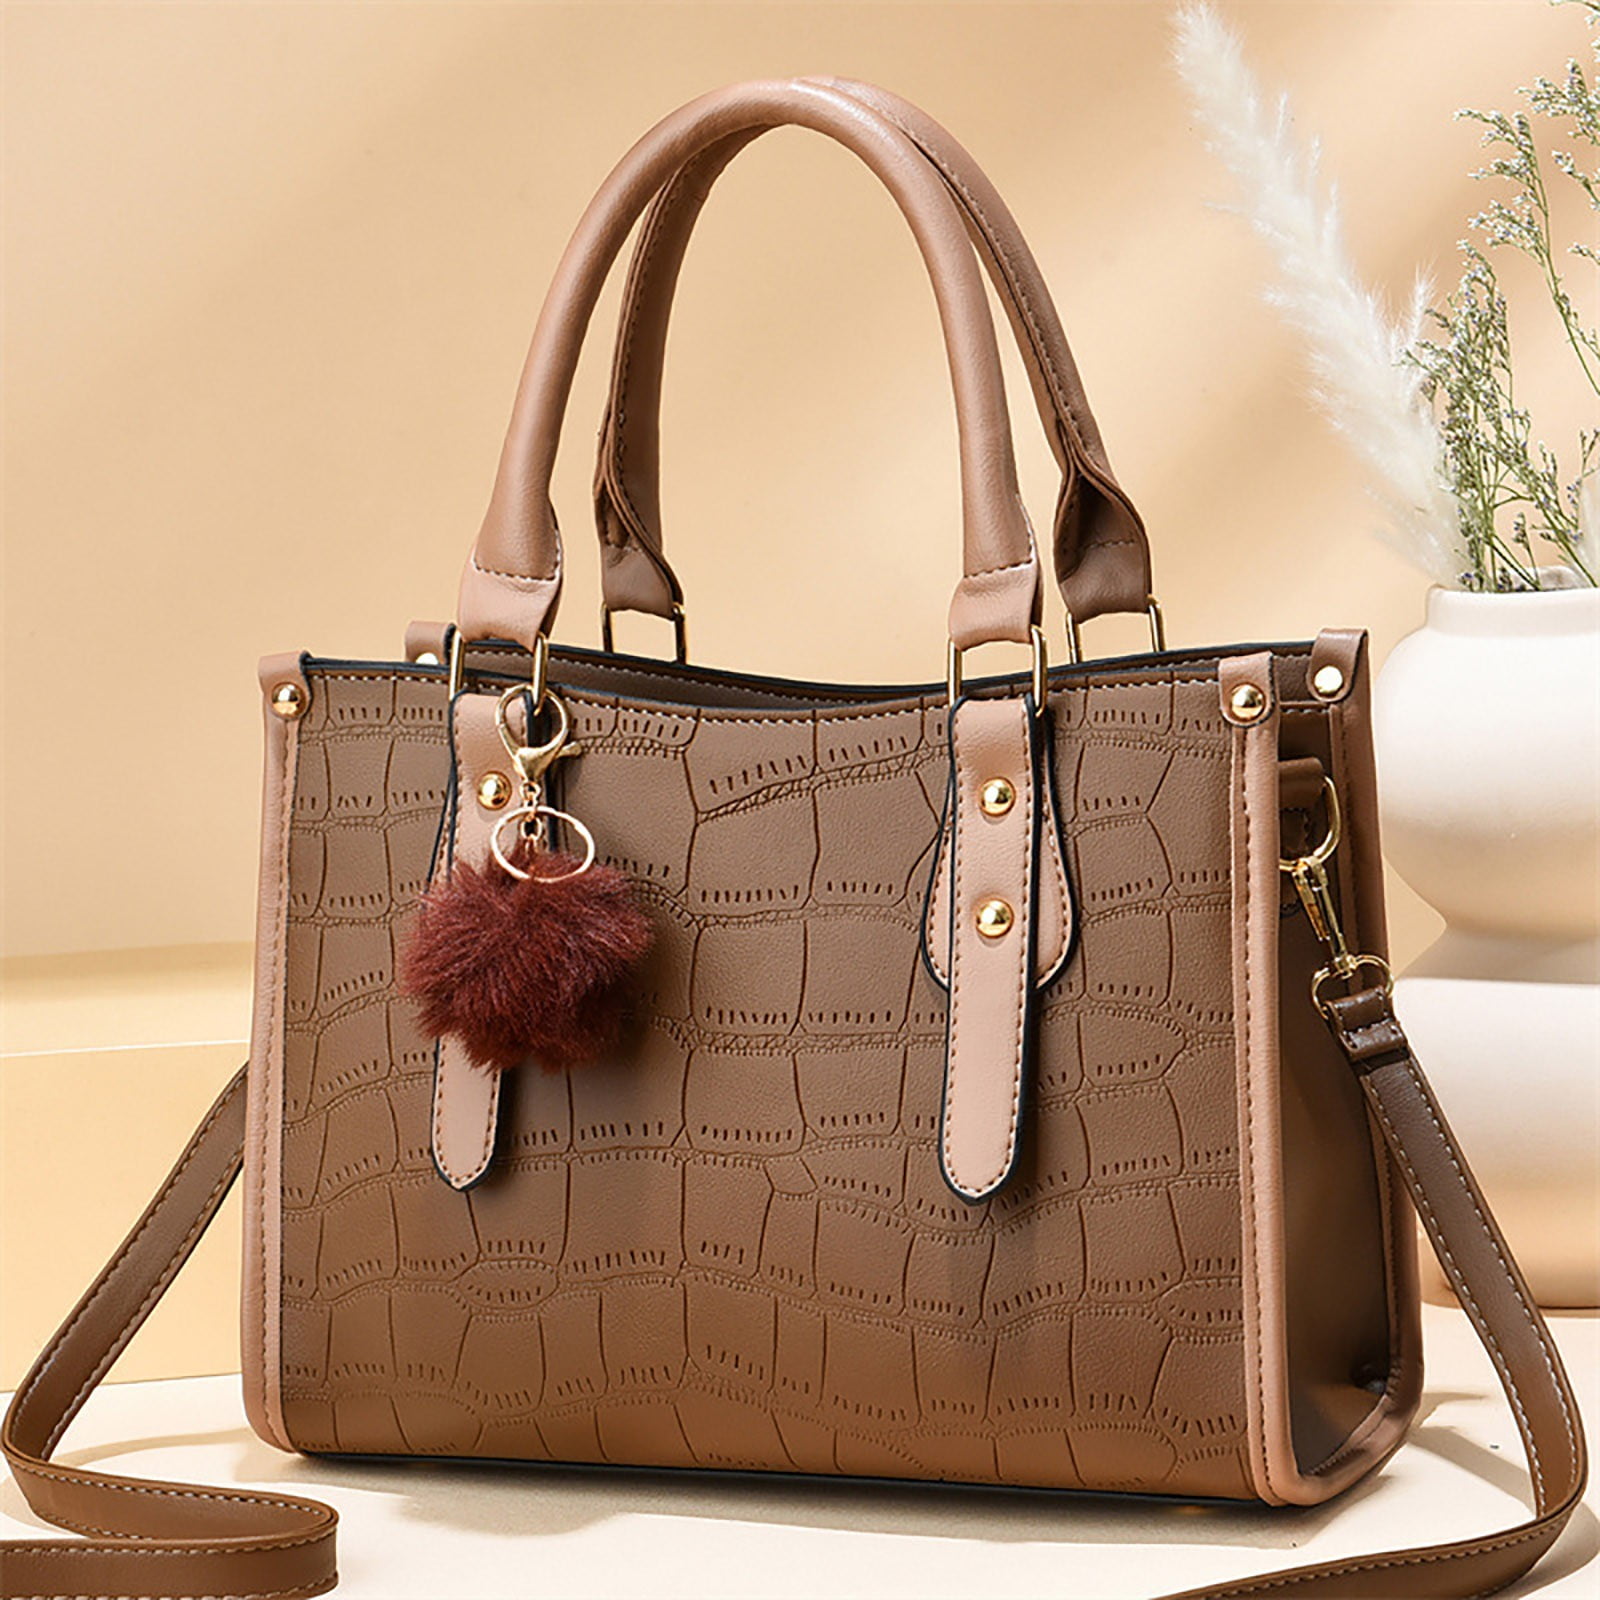 Womens Fashion Tote Bag Handbags Ladies Purse Satchel Shoulder Bags Tote  Leather Bag Channel Bags for Women Handbag Leather Tassels for Handbags  Large Clear Tote Bag Custom Tote Bags Organizer Tote 